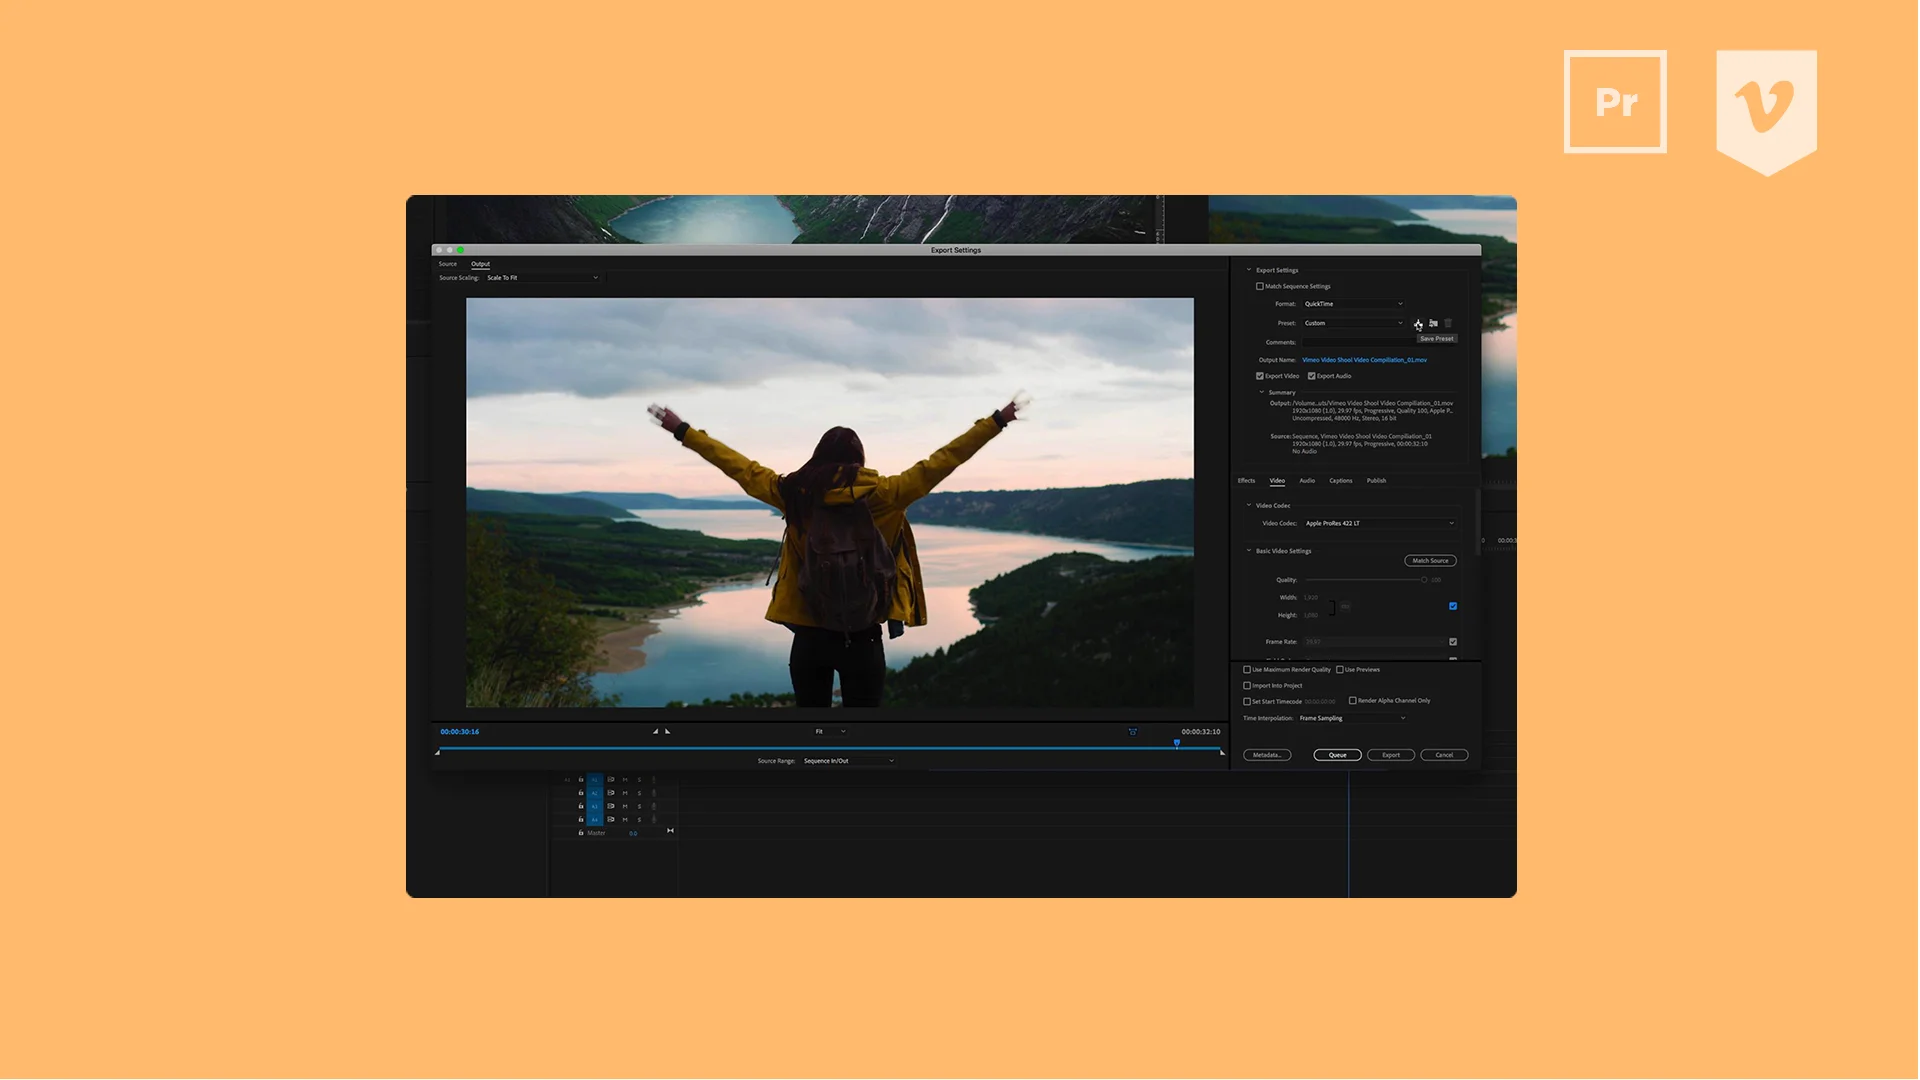 What are Presets in the Create editor? – Vimeo Help Center